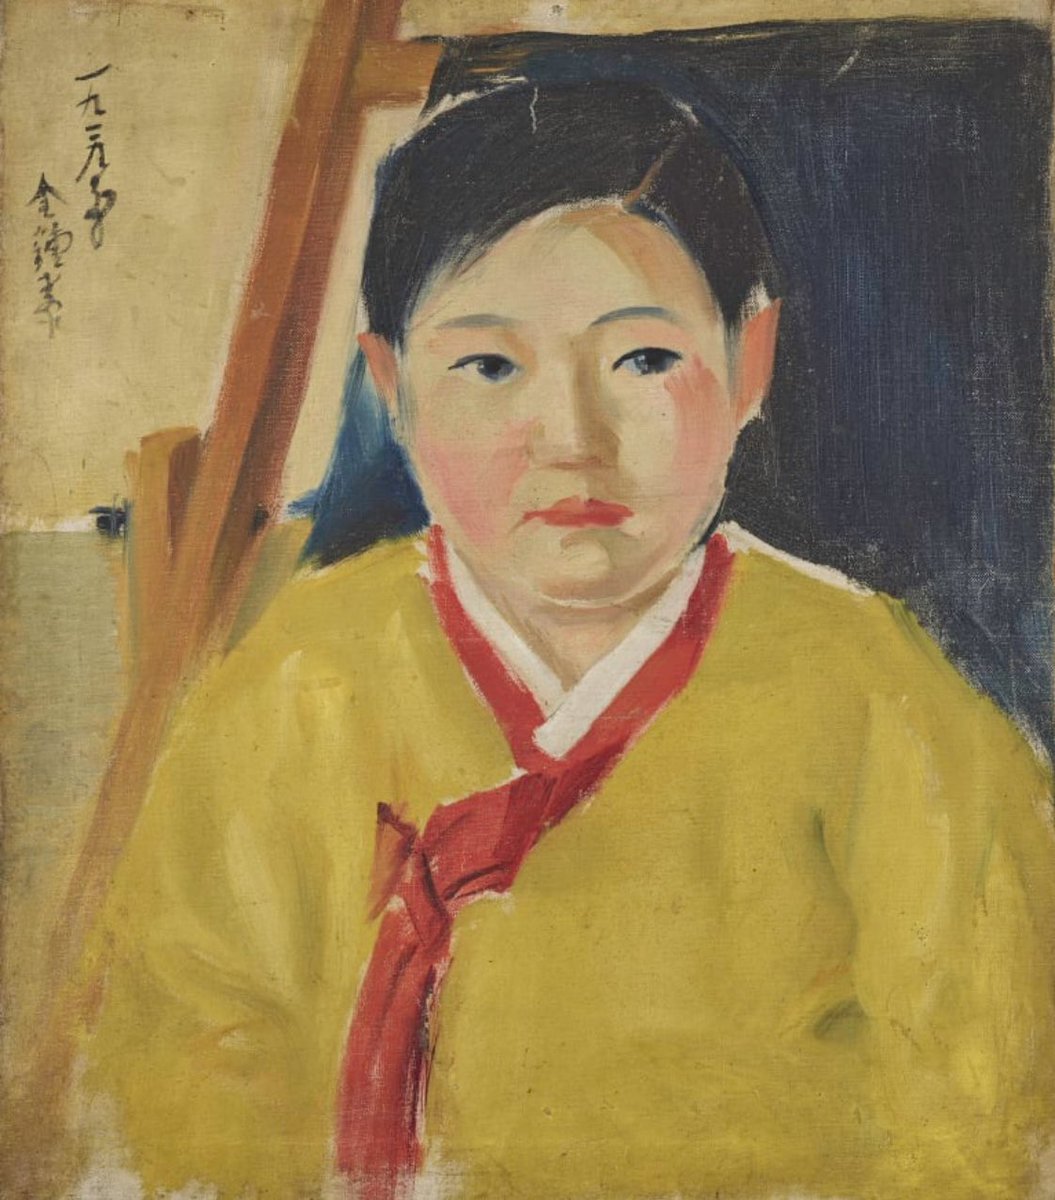 The painting on the art book RM was reading is 'Yellow Top, 노란 저고리 (1929)' by Korean painter, Kim Chong Tai, 김종태 (1906-1935) who taught himself Western-style painting. He is a modern artist, Yellow Top is a representative work of Kim

@BTS_twt
*RM really loves Korean Arts